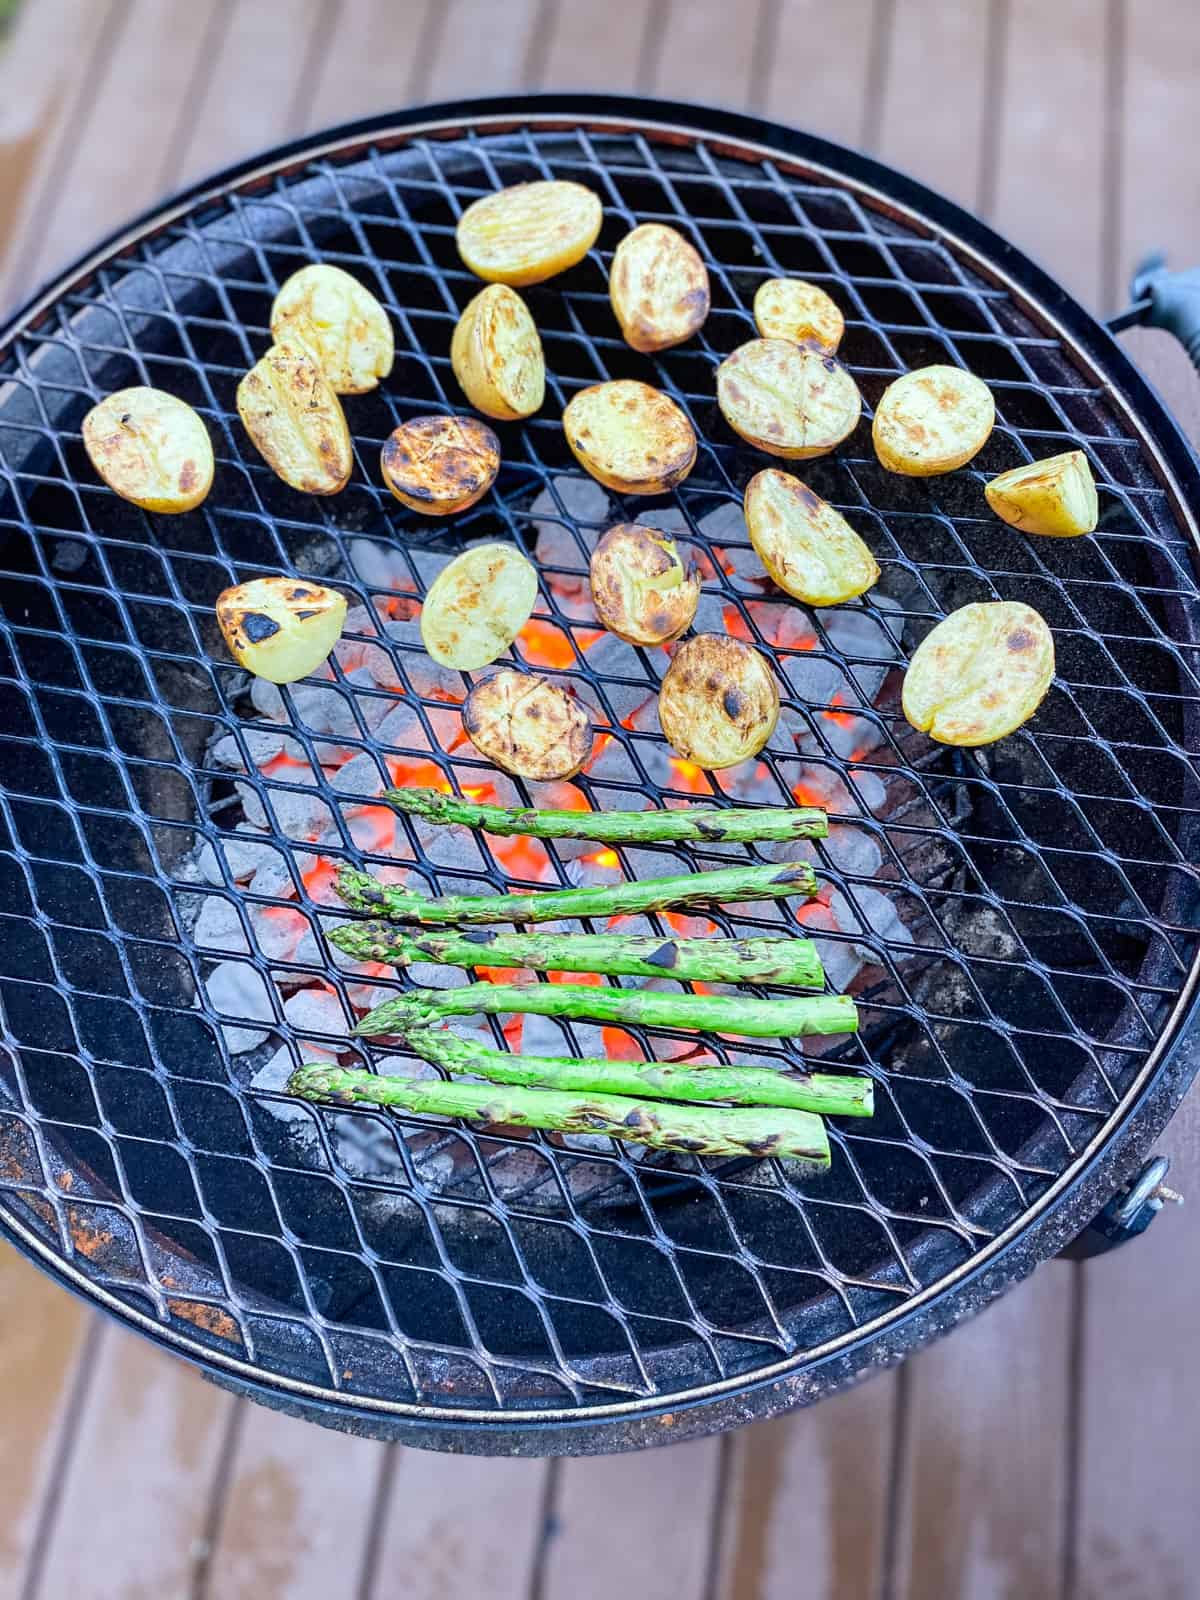 Grill the potatoes and asparagus until lightly charred on all sides.